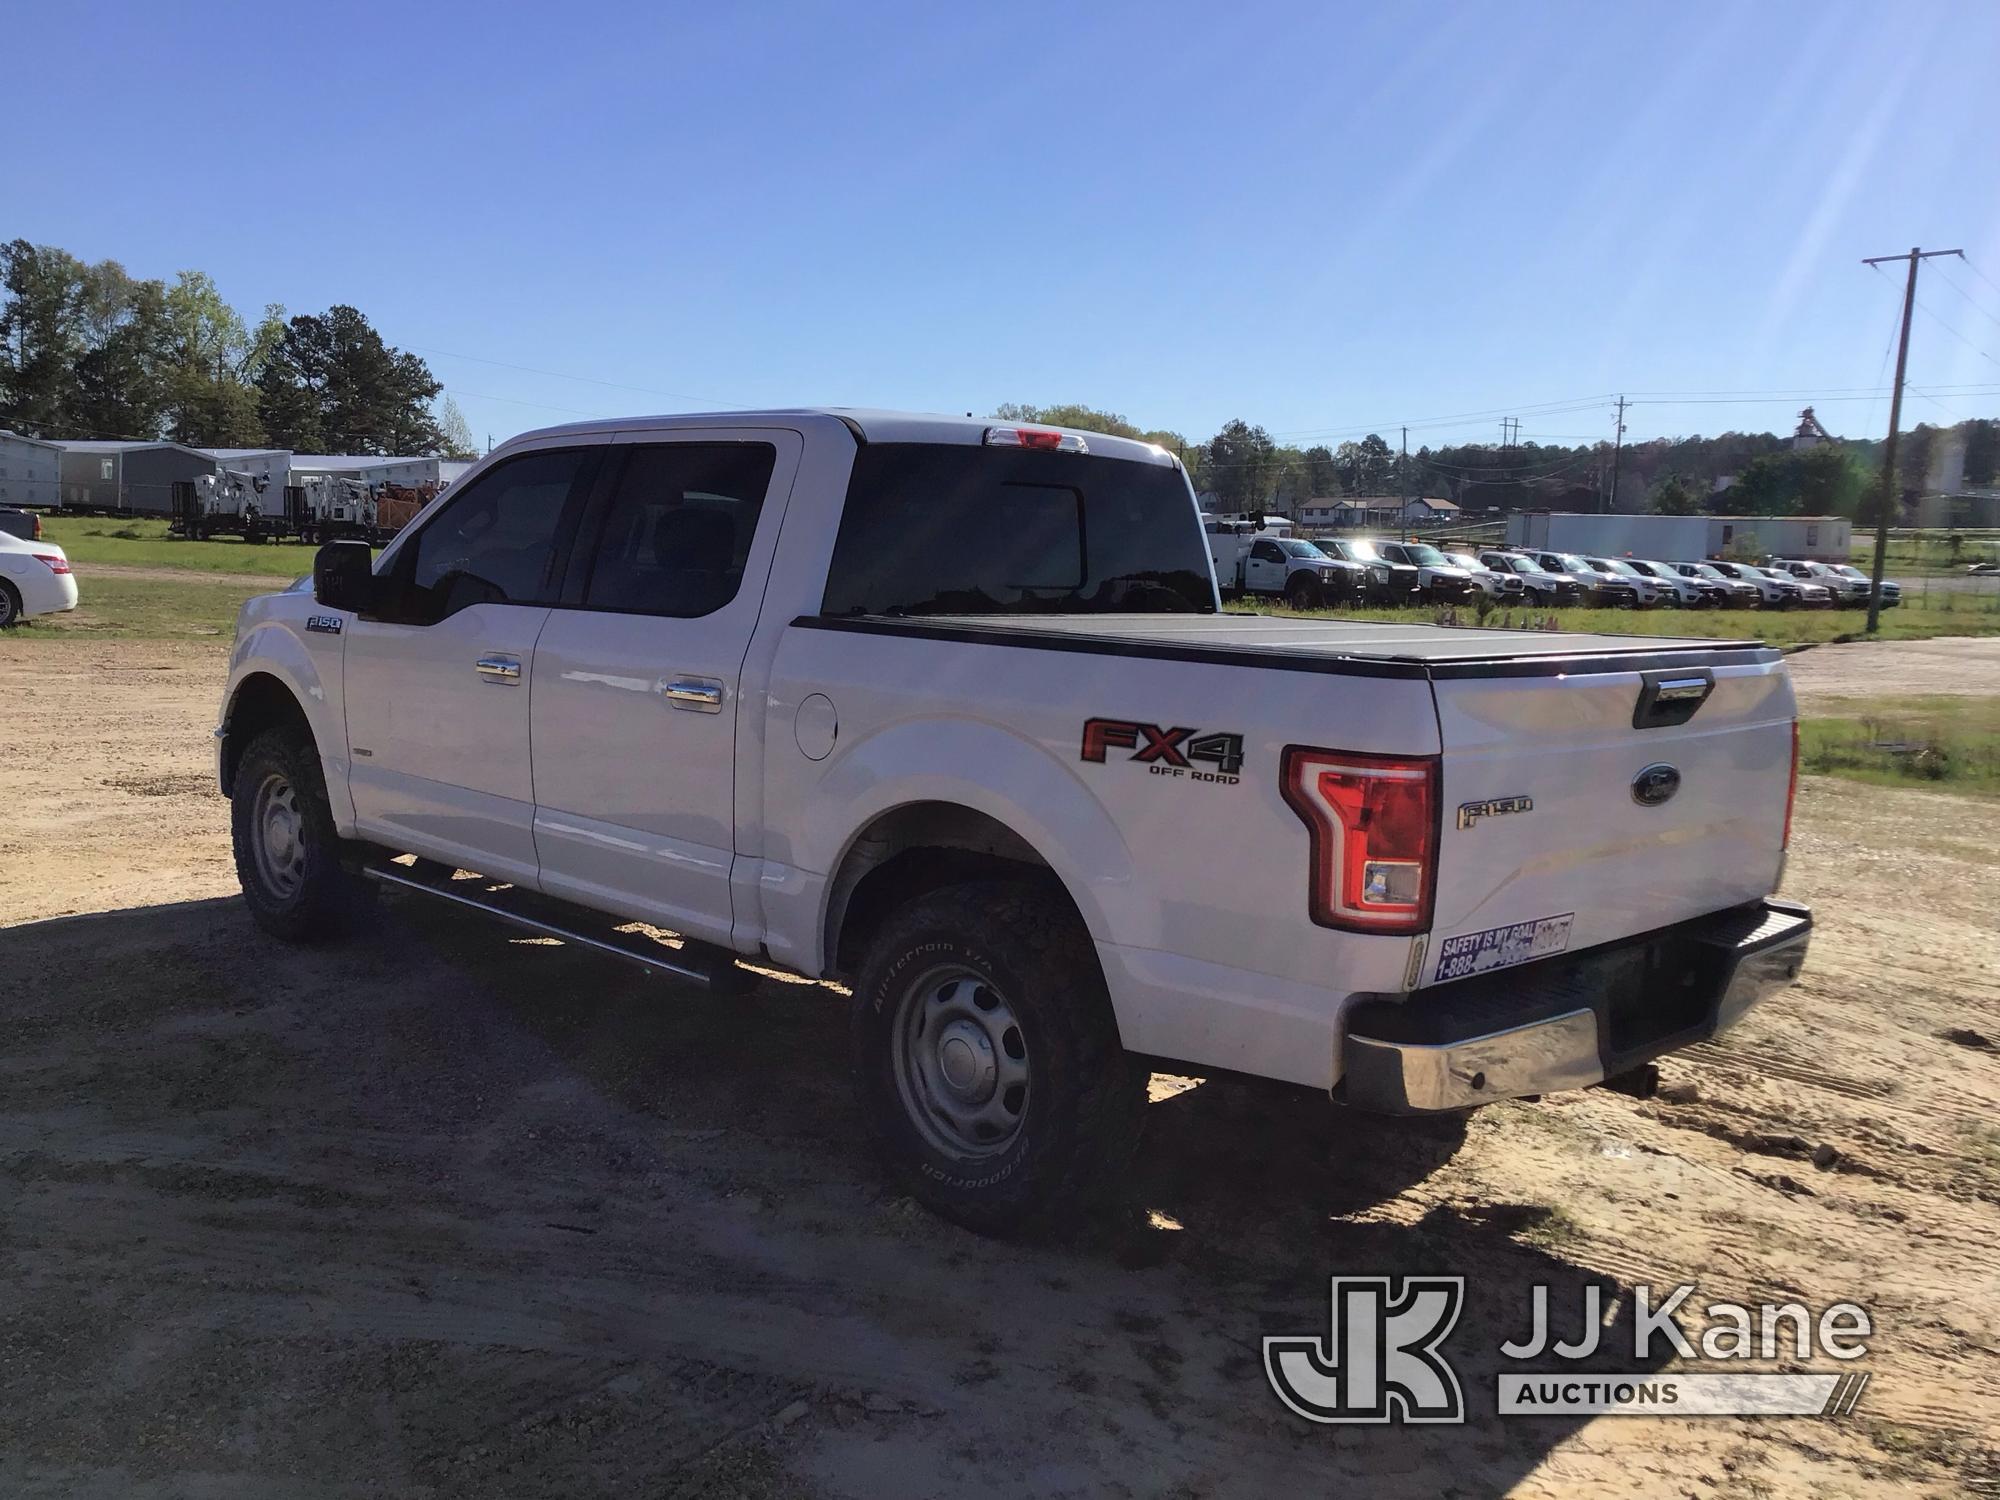 (Byram, MS) 2017 Ford F150 4x4 Crew-Cab Pickup Truck Runs & Moves)  (As Per Seller:Bad Transmission